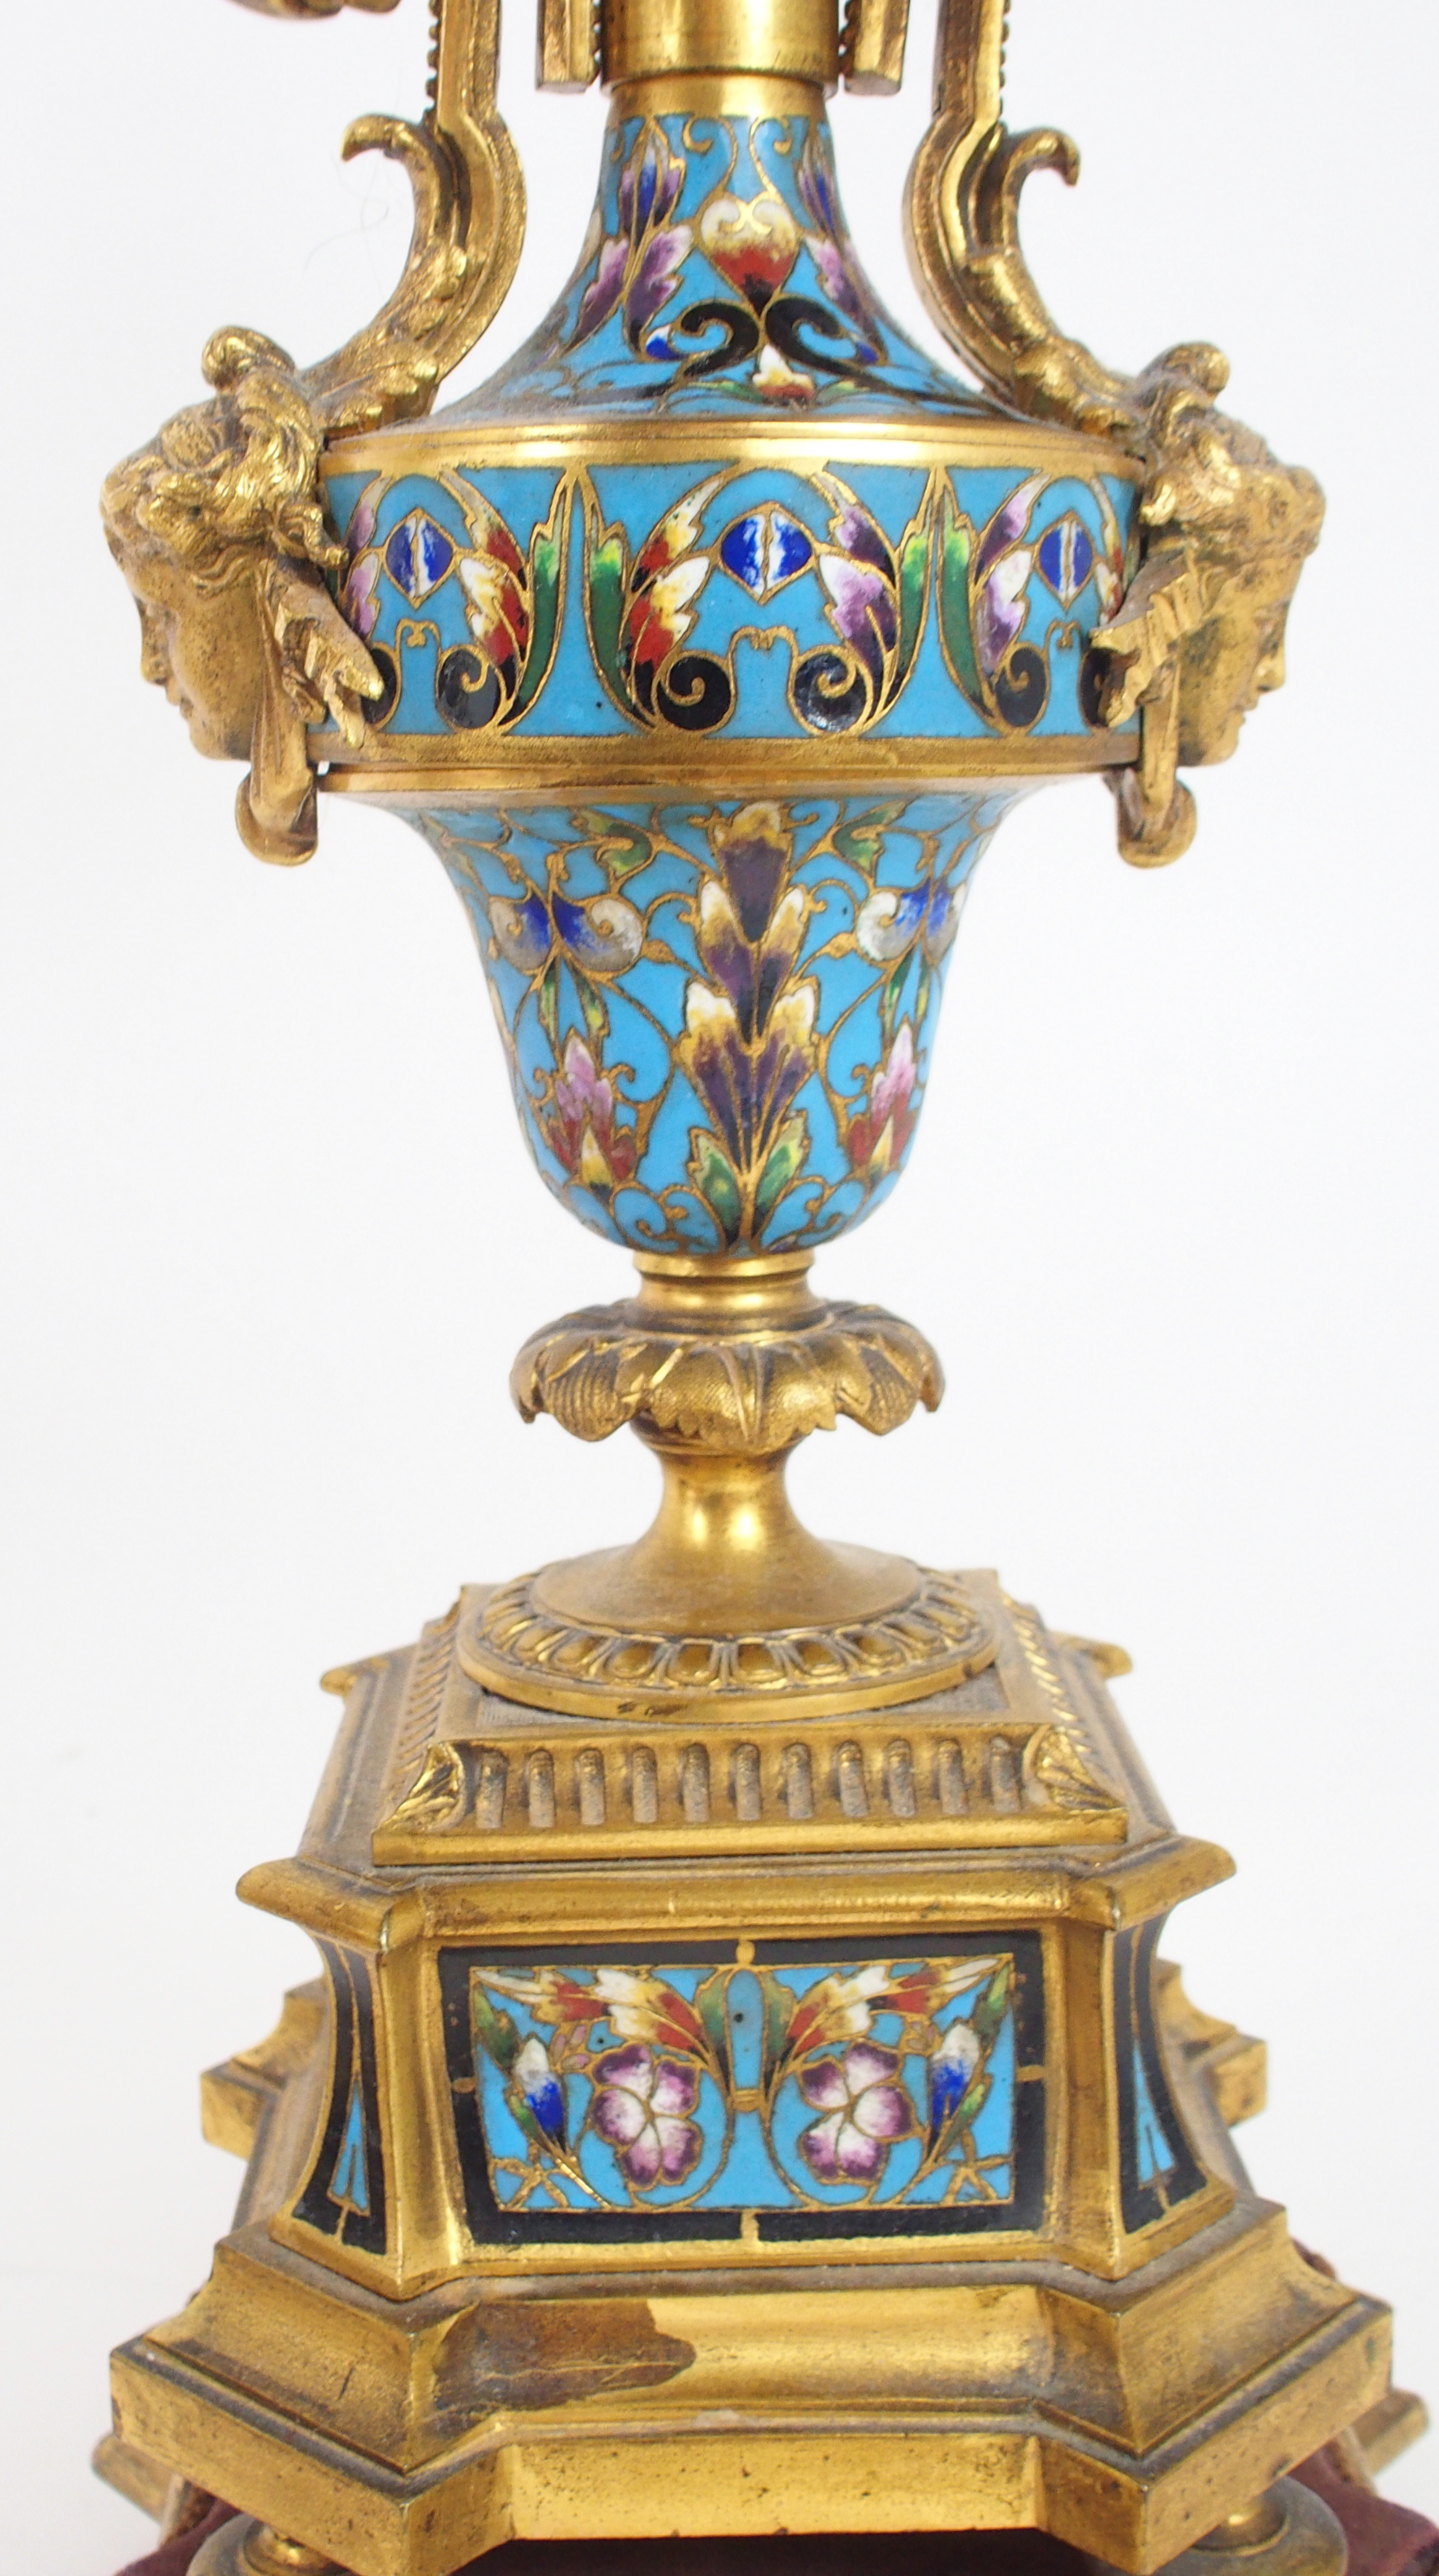 AN IMPRESSIVE 19TH CENTURY FRENCH CHAMPLEVE ENAMEL MANTLE CLOCK the urn mounted top with griffin han - Image 12 of 15